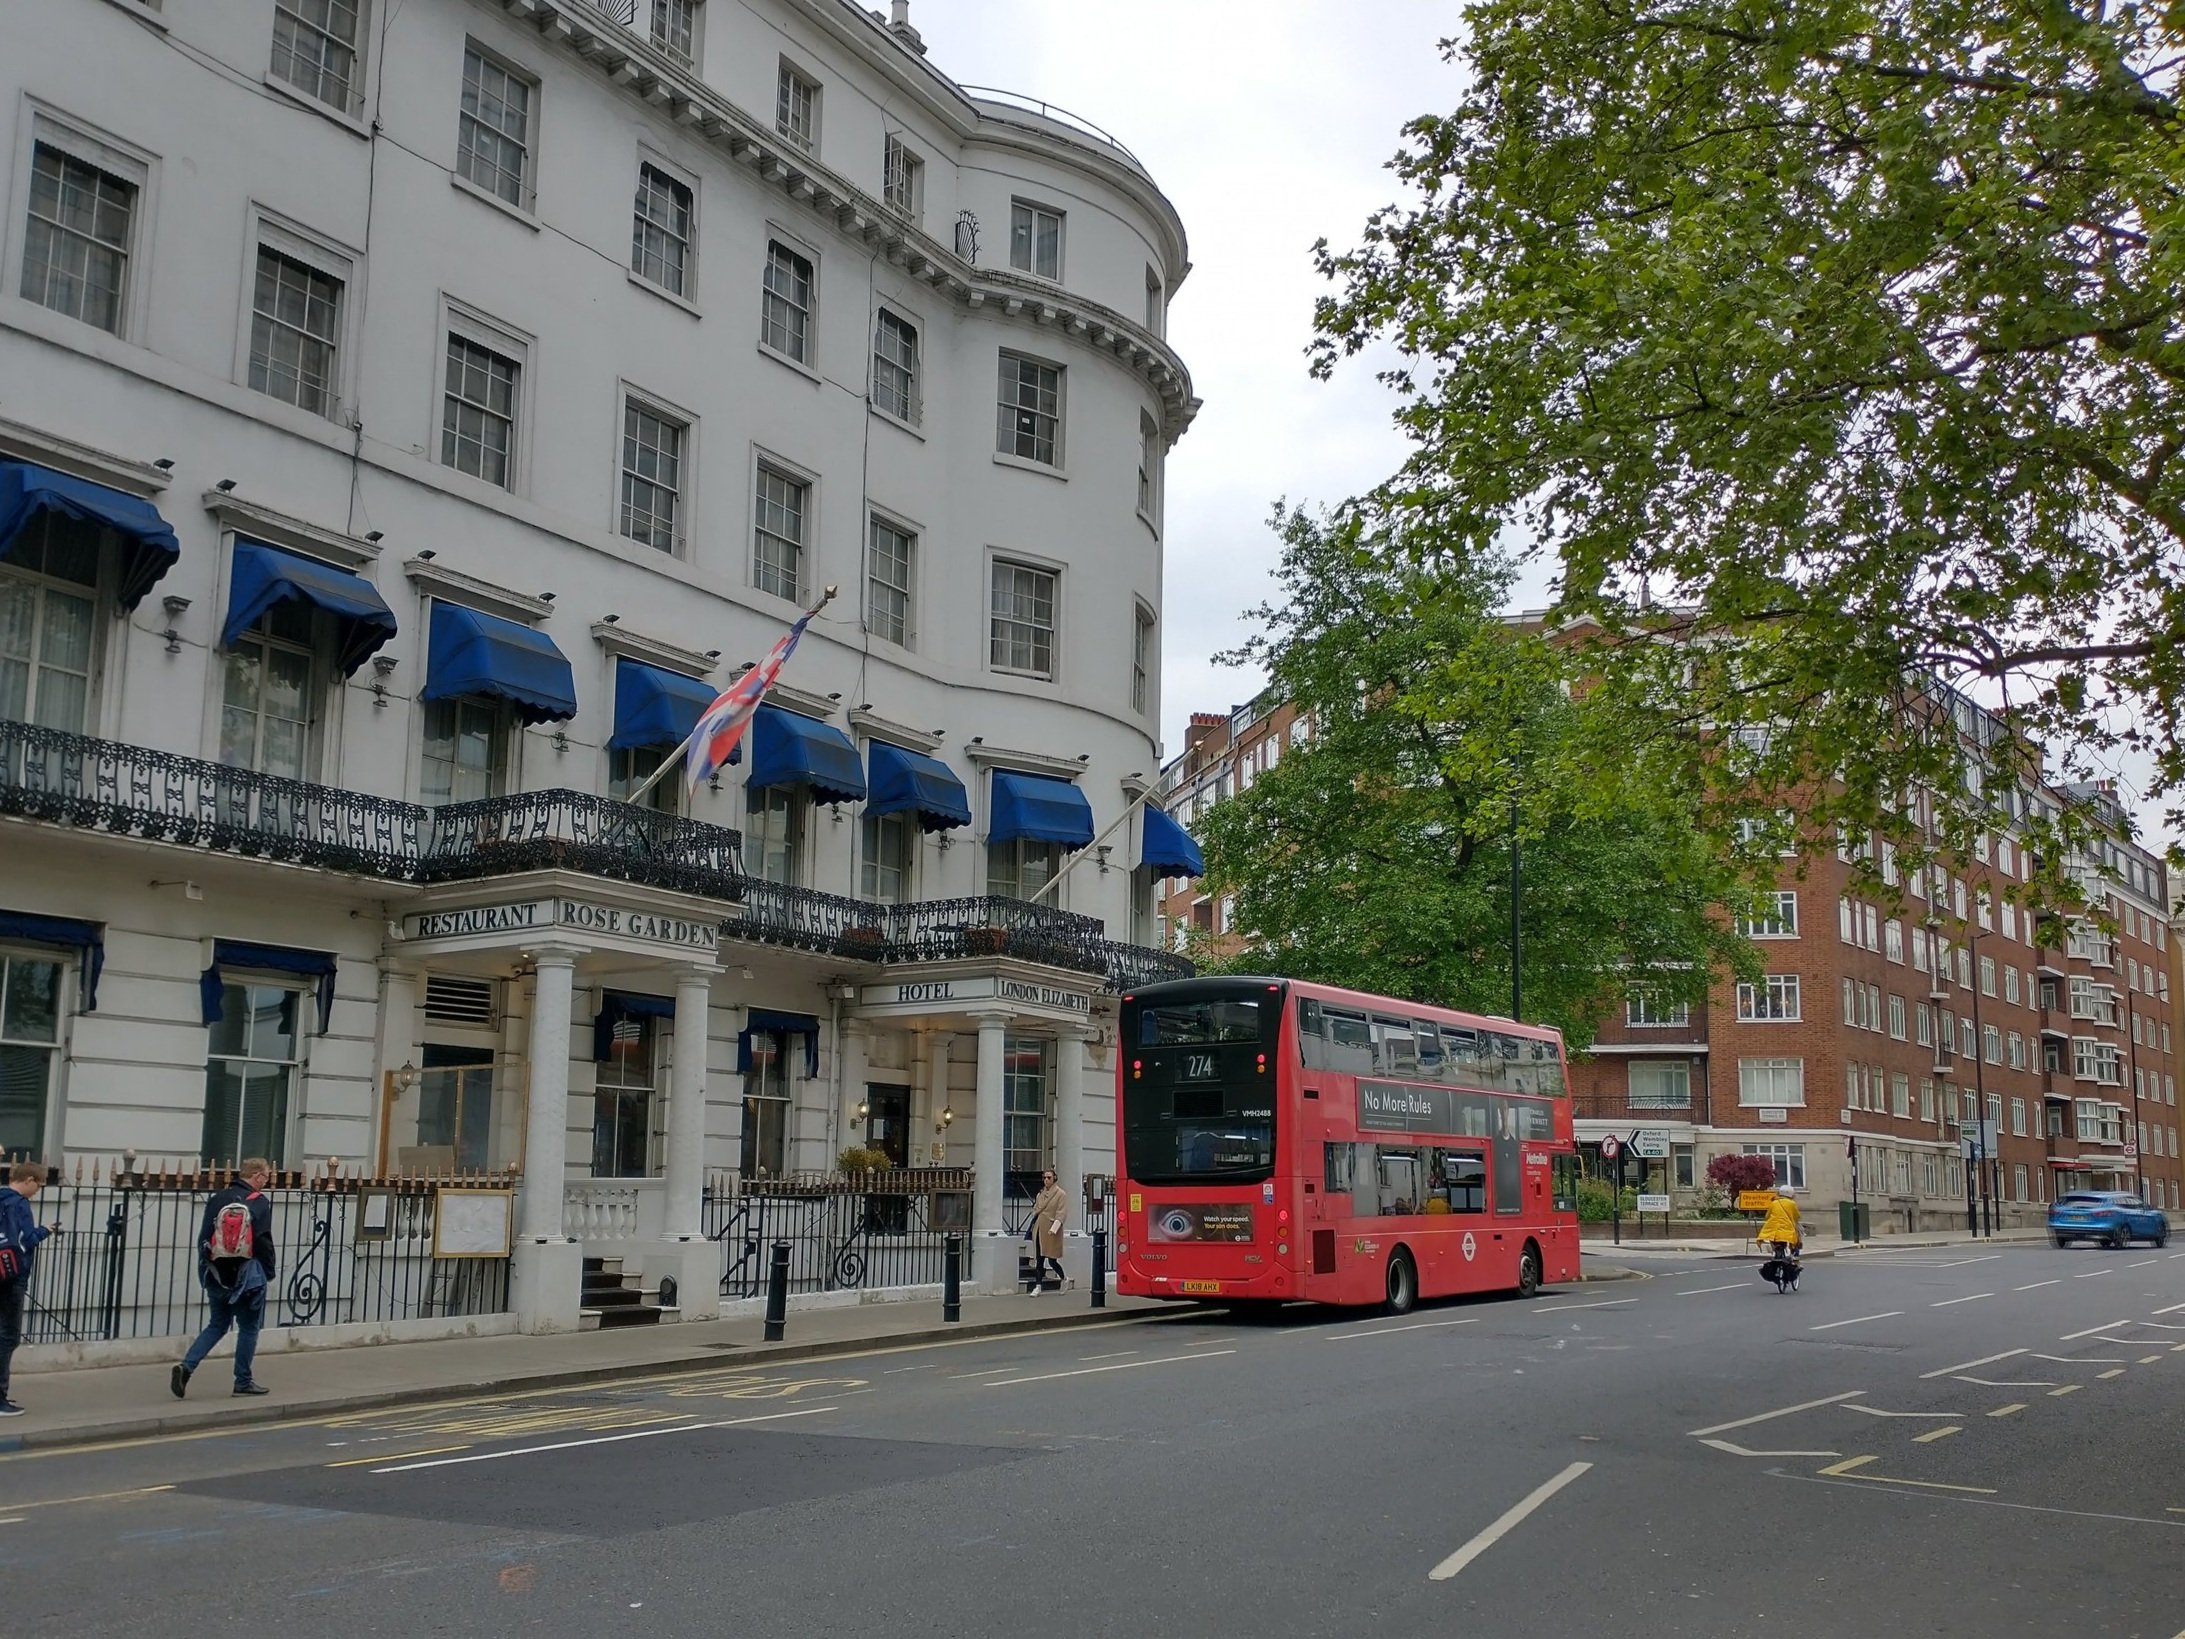 red-double-decker-bus-in-front-of-a-hotel-in-london